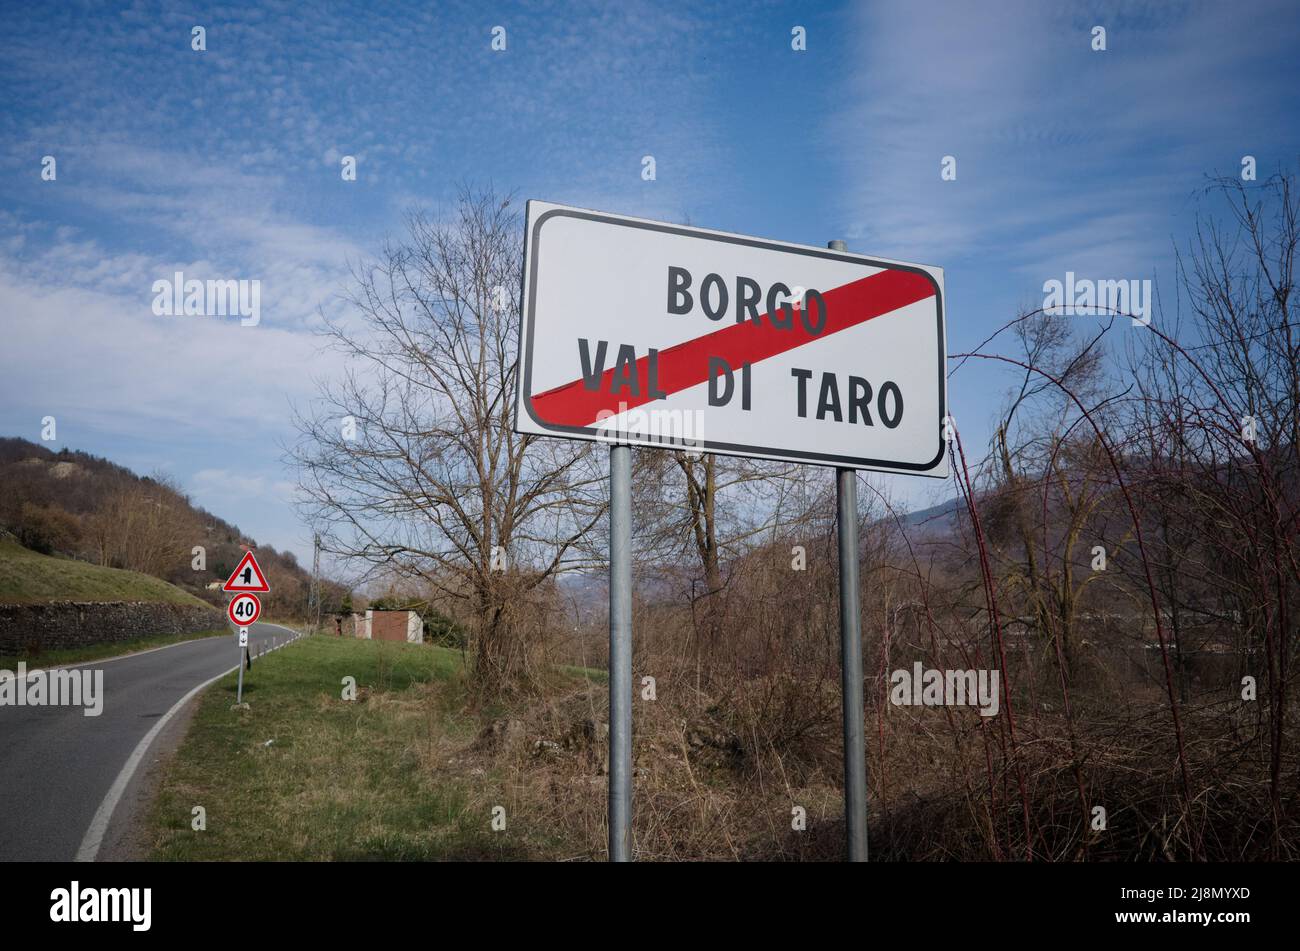 Road sign end of town Borgo Val di Taro, Parma province, Italy. Road sign indicating leaving town with city name crossed out with red stripe Stock Photo